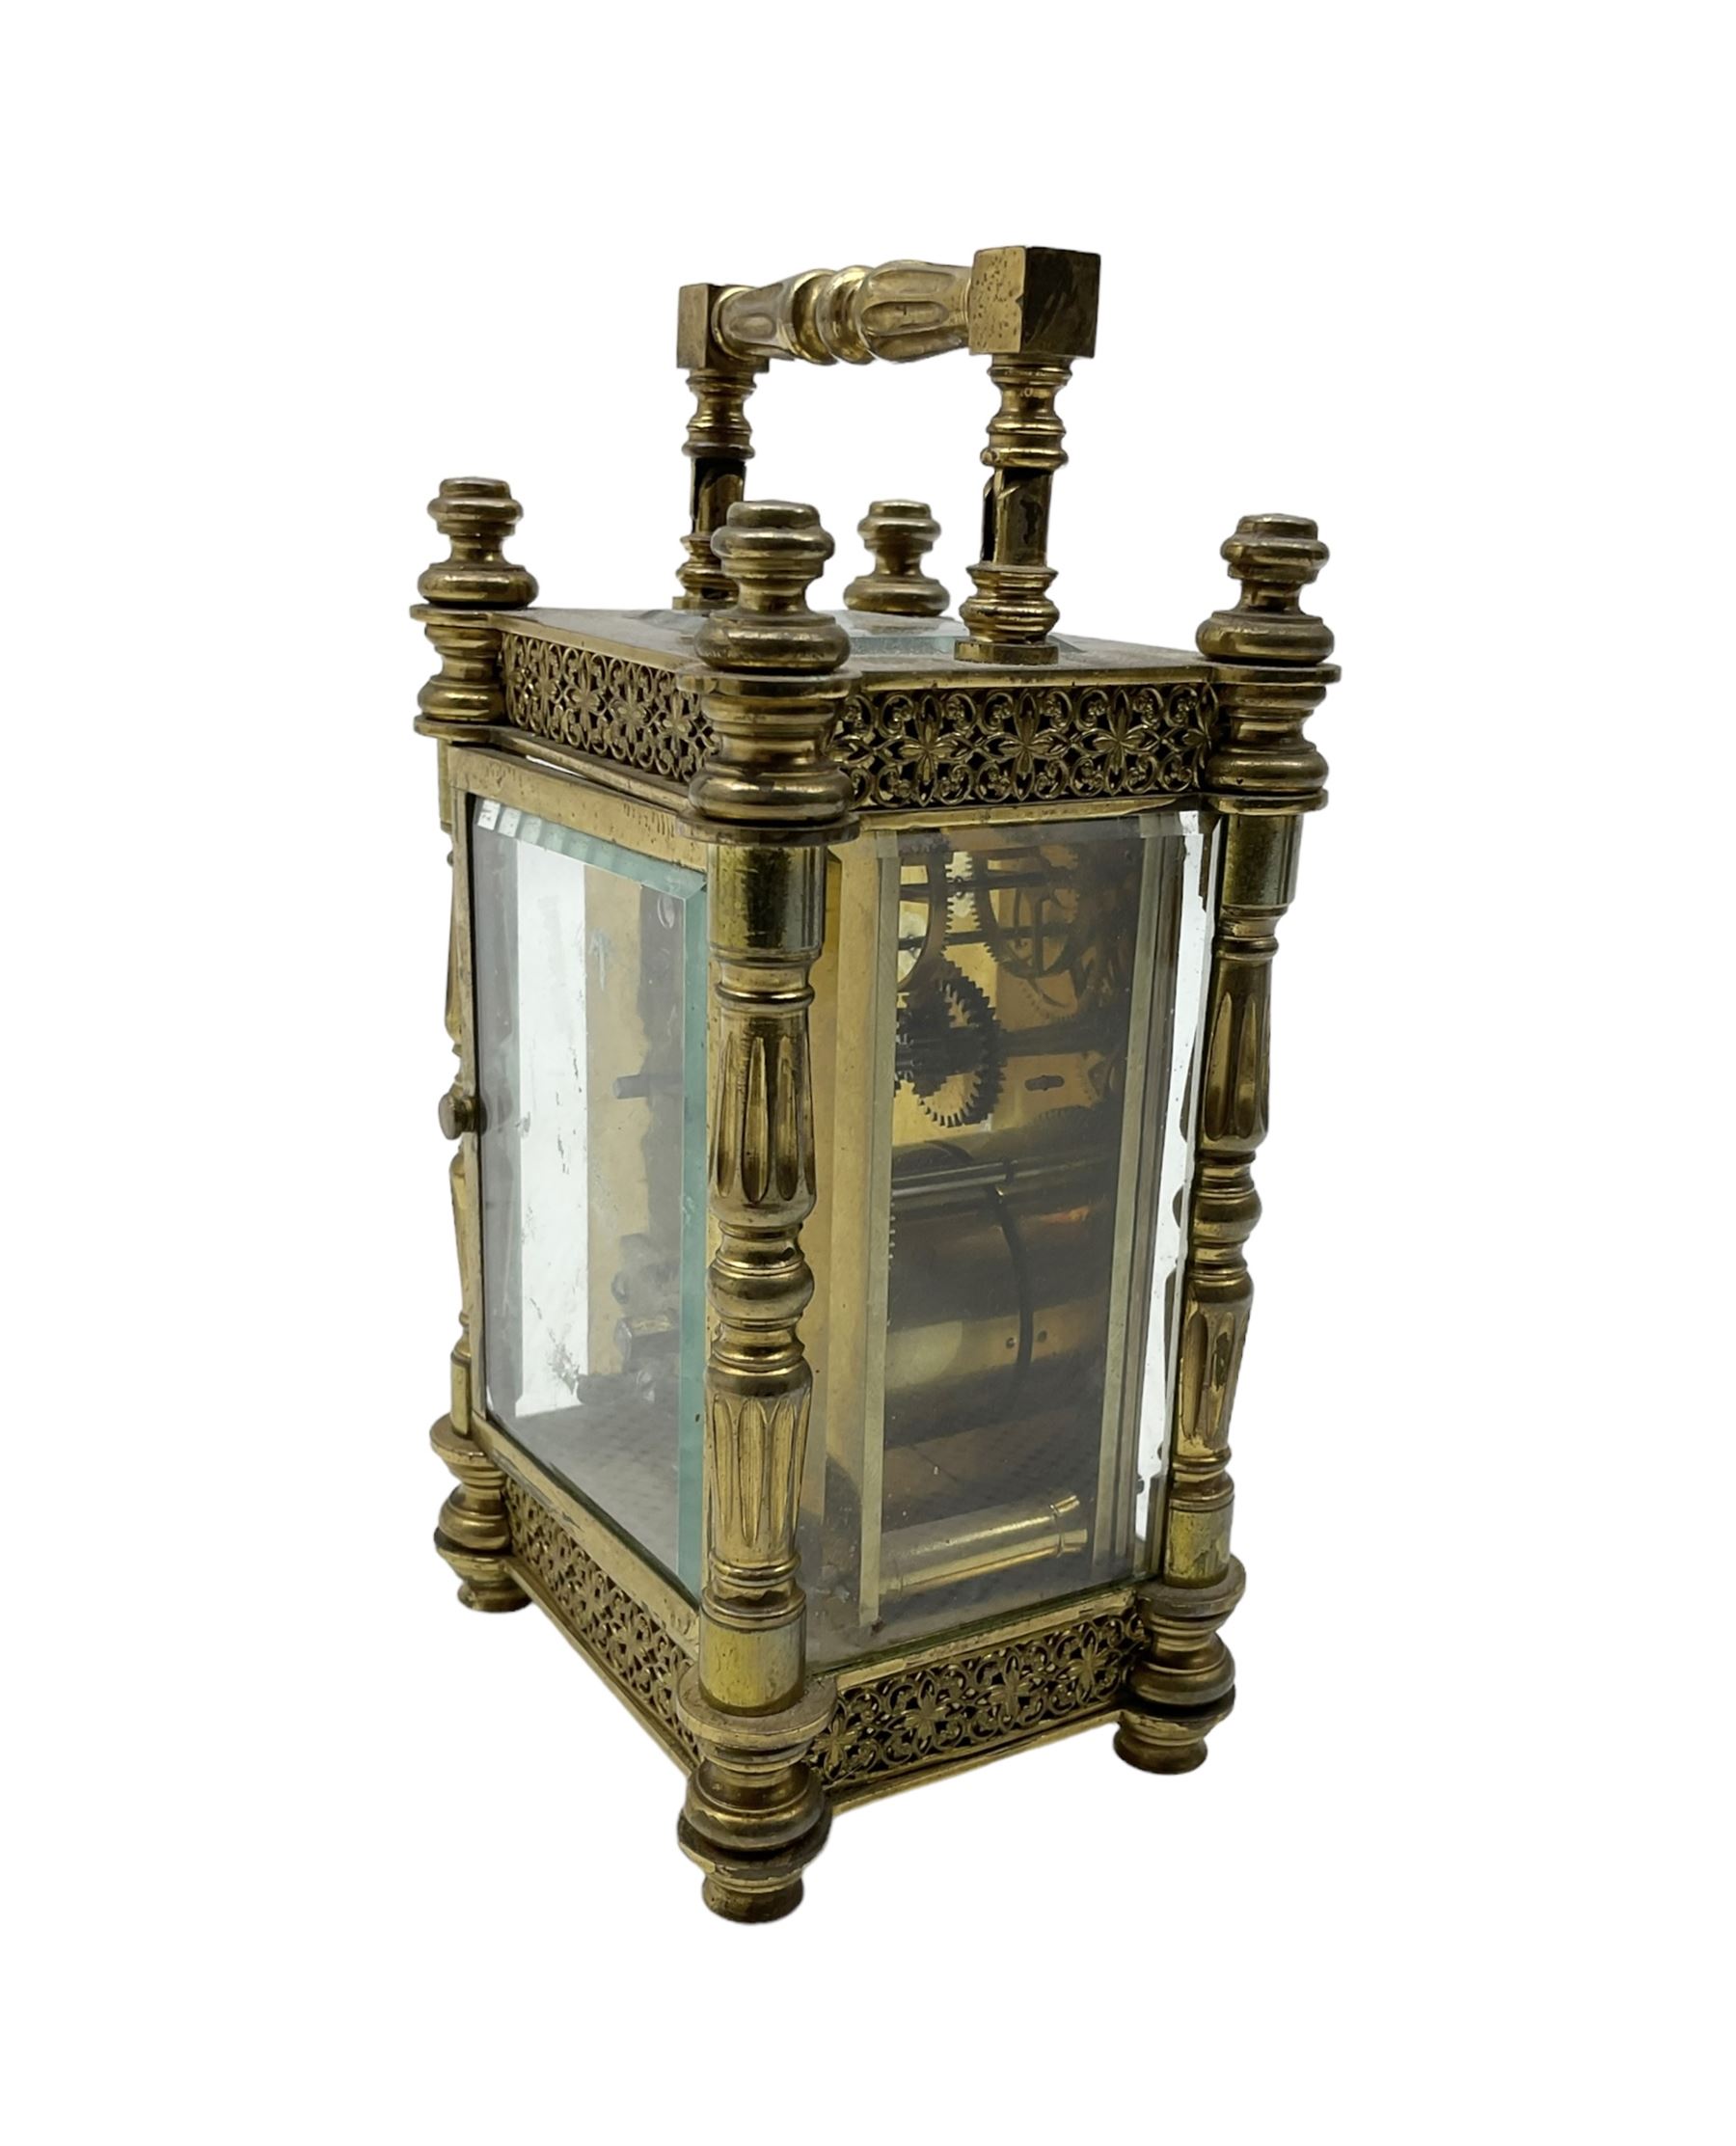 French - Edwardian timepiece 8-day carriage clock c1910 with a decorative case cast finished in high - Image 5 of 5